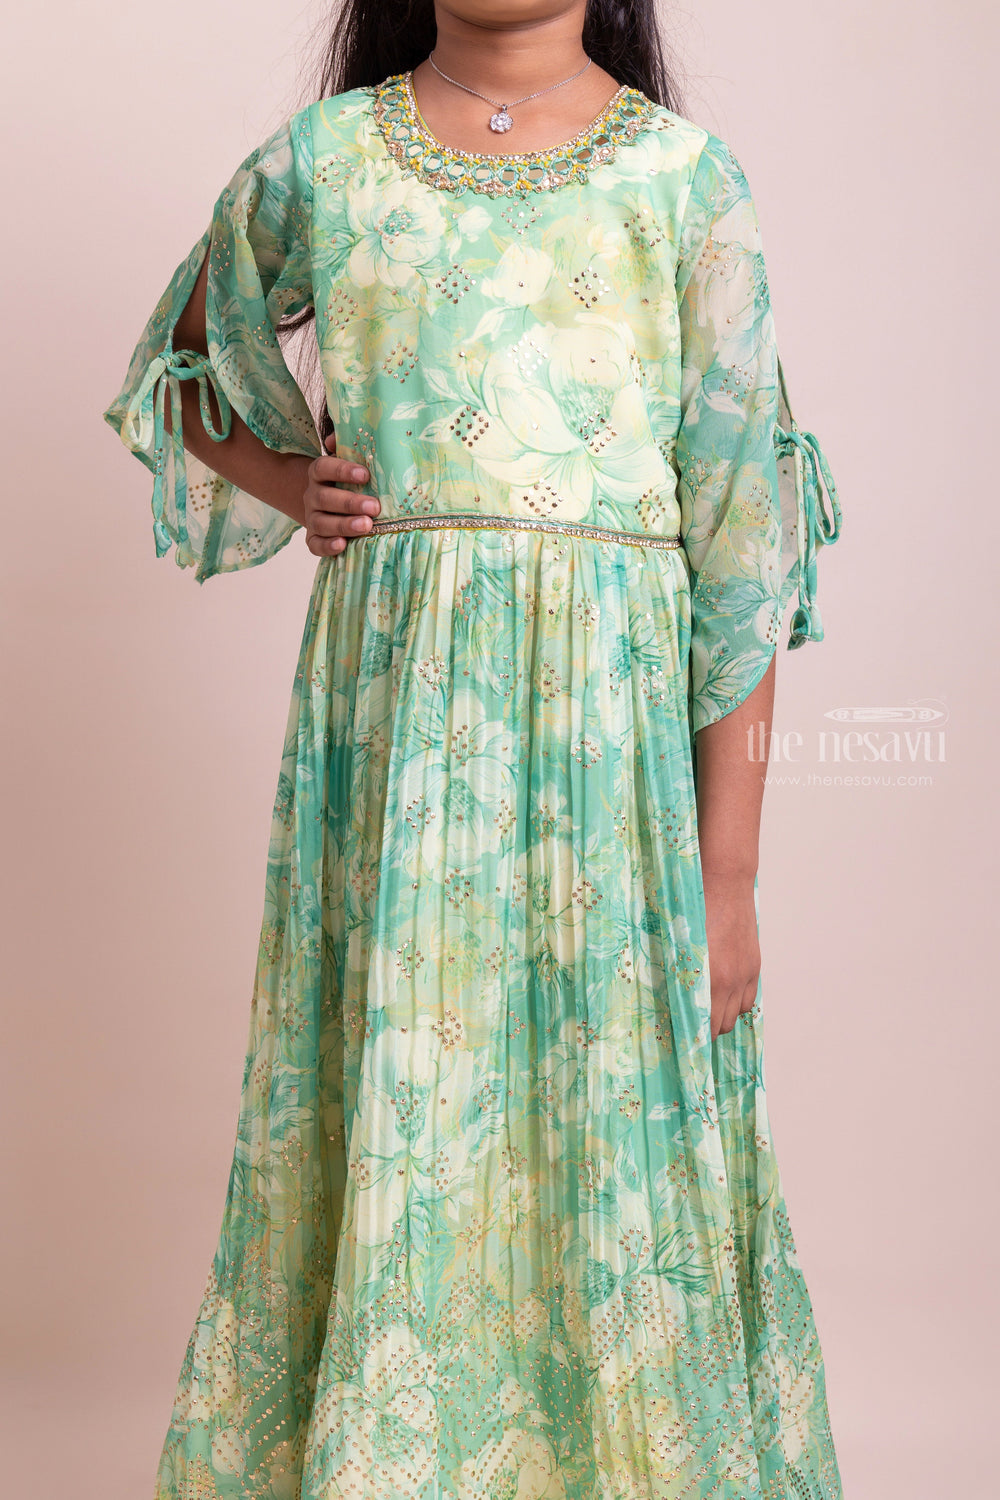 The Nesavu Party Gown Gorgeous Green Floral Chinos Semi Silk Printed Anarkali For Young Girls Nesavu Latest Anarkali Dress For Girls | Ethnic Wear For Girls | The Nesavu